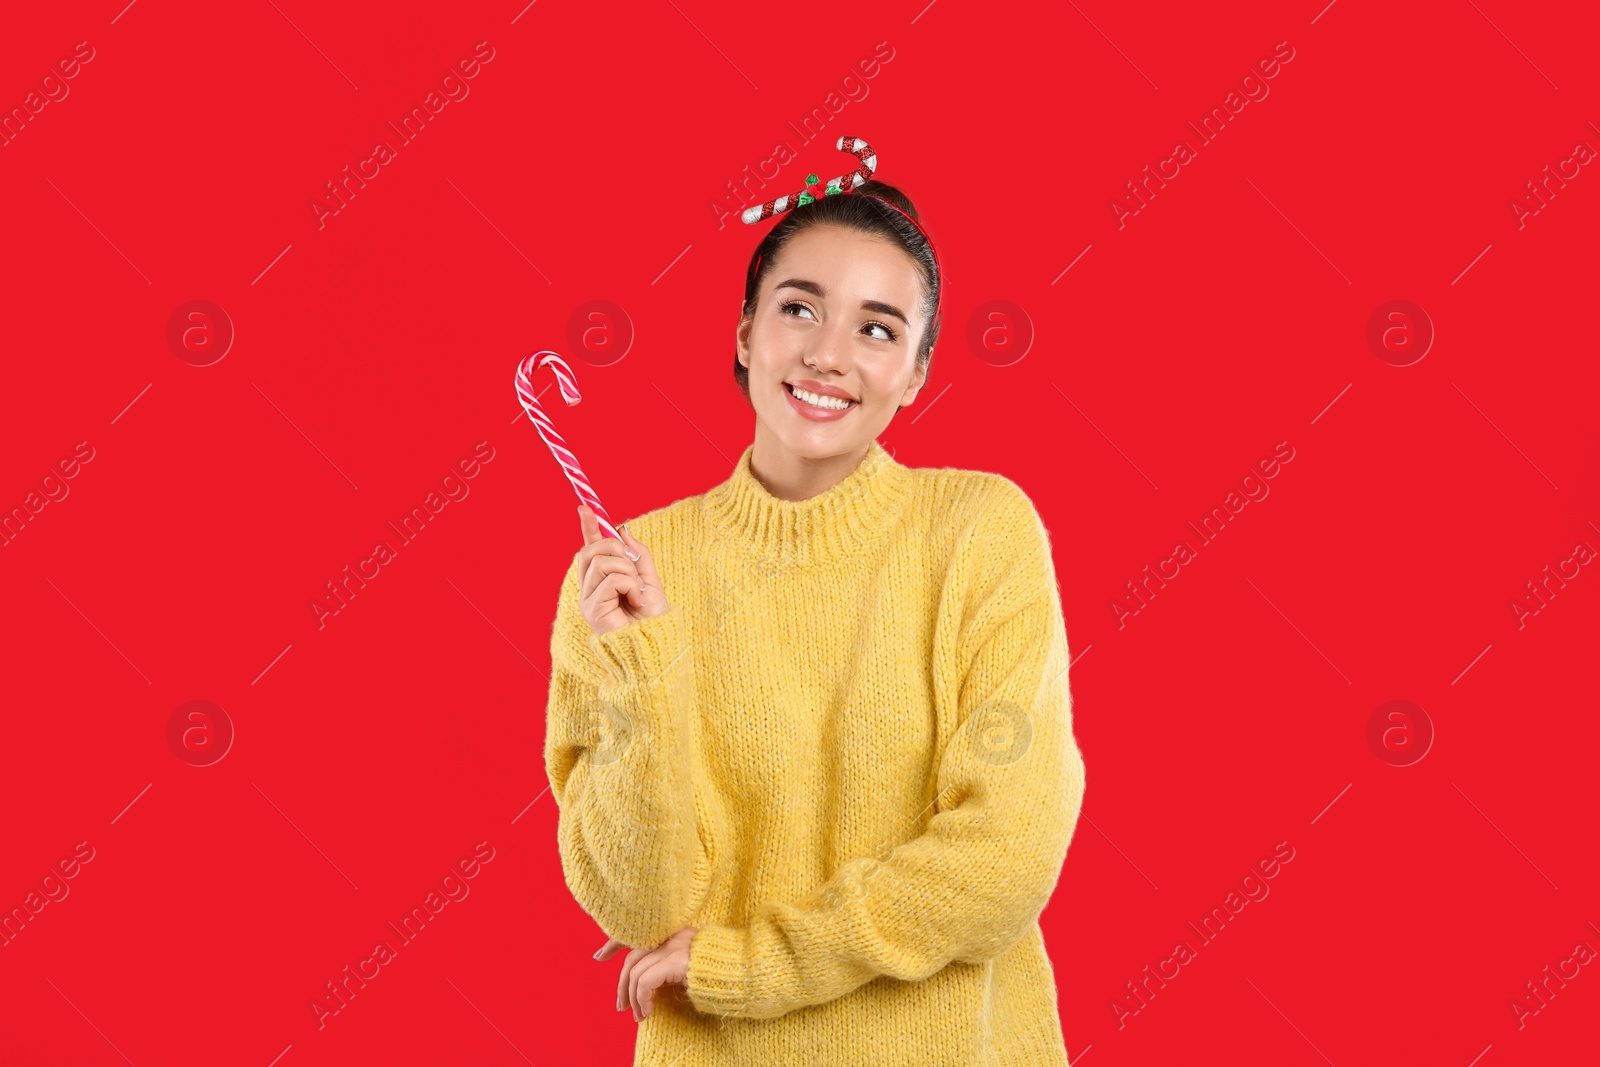 Photo of Young woman in yellow sweater and festive headband holding candy cane on red background